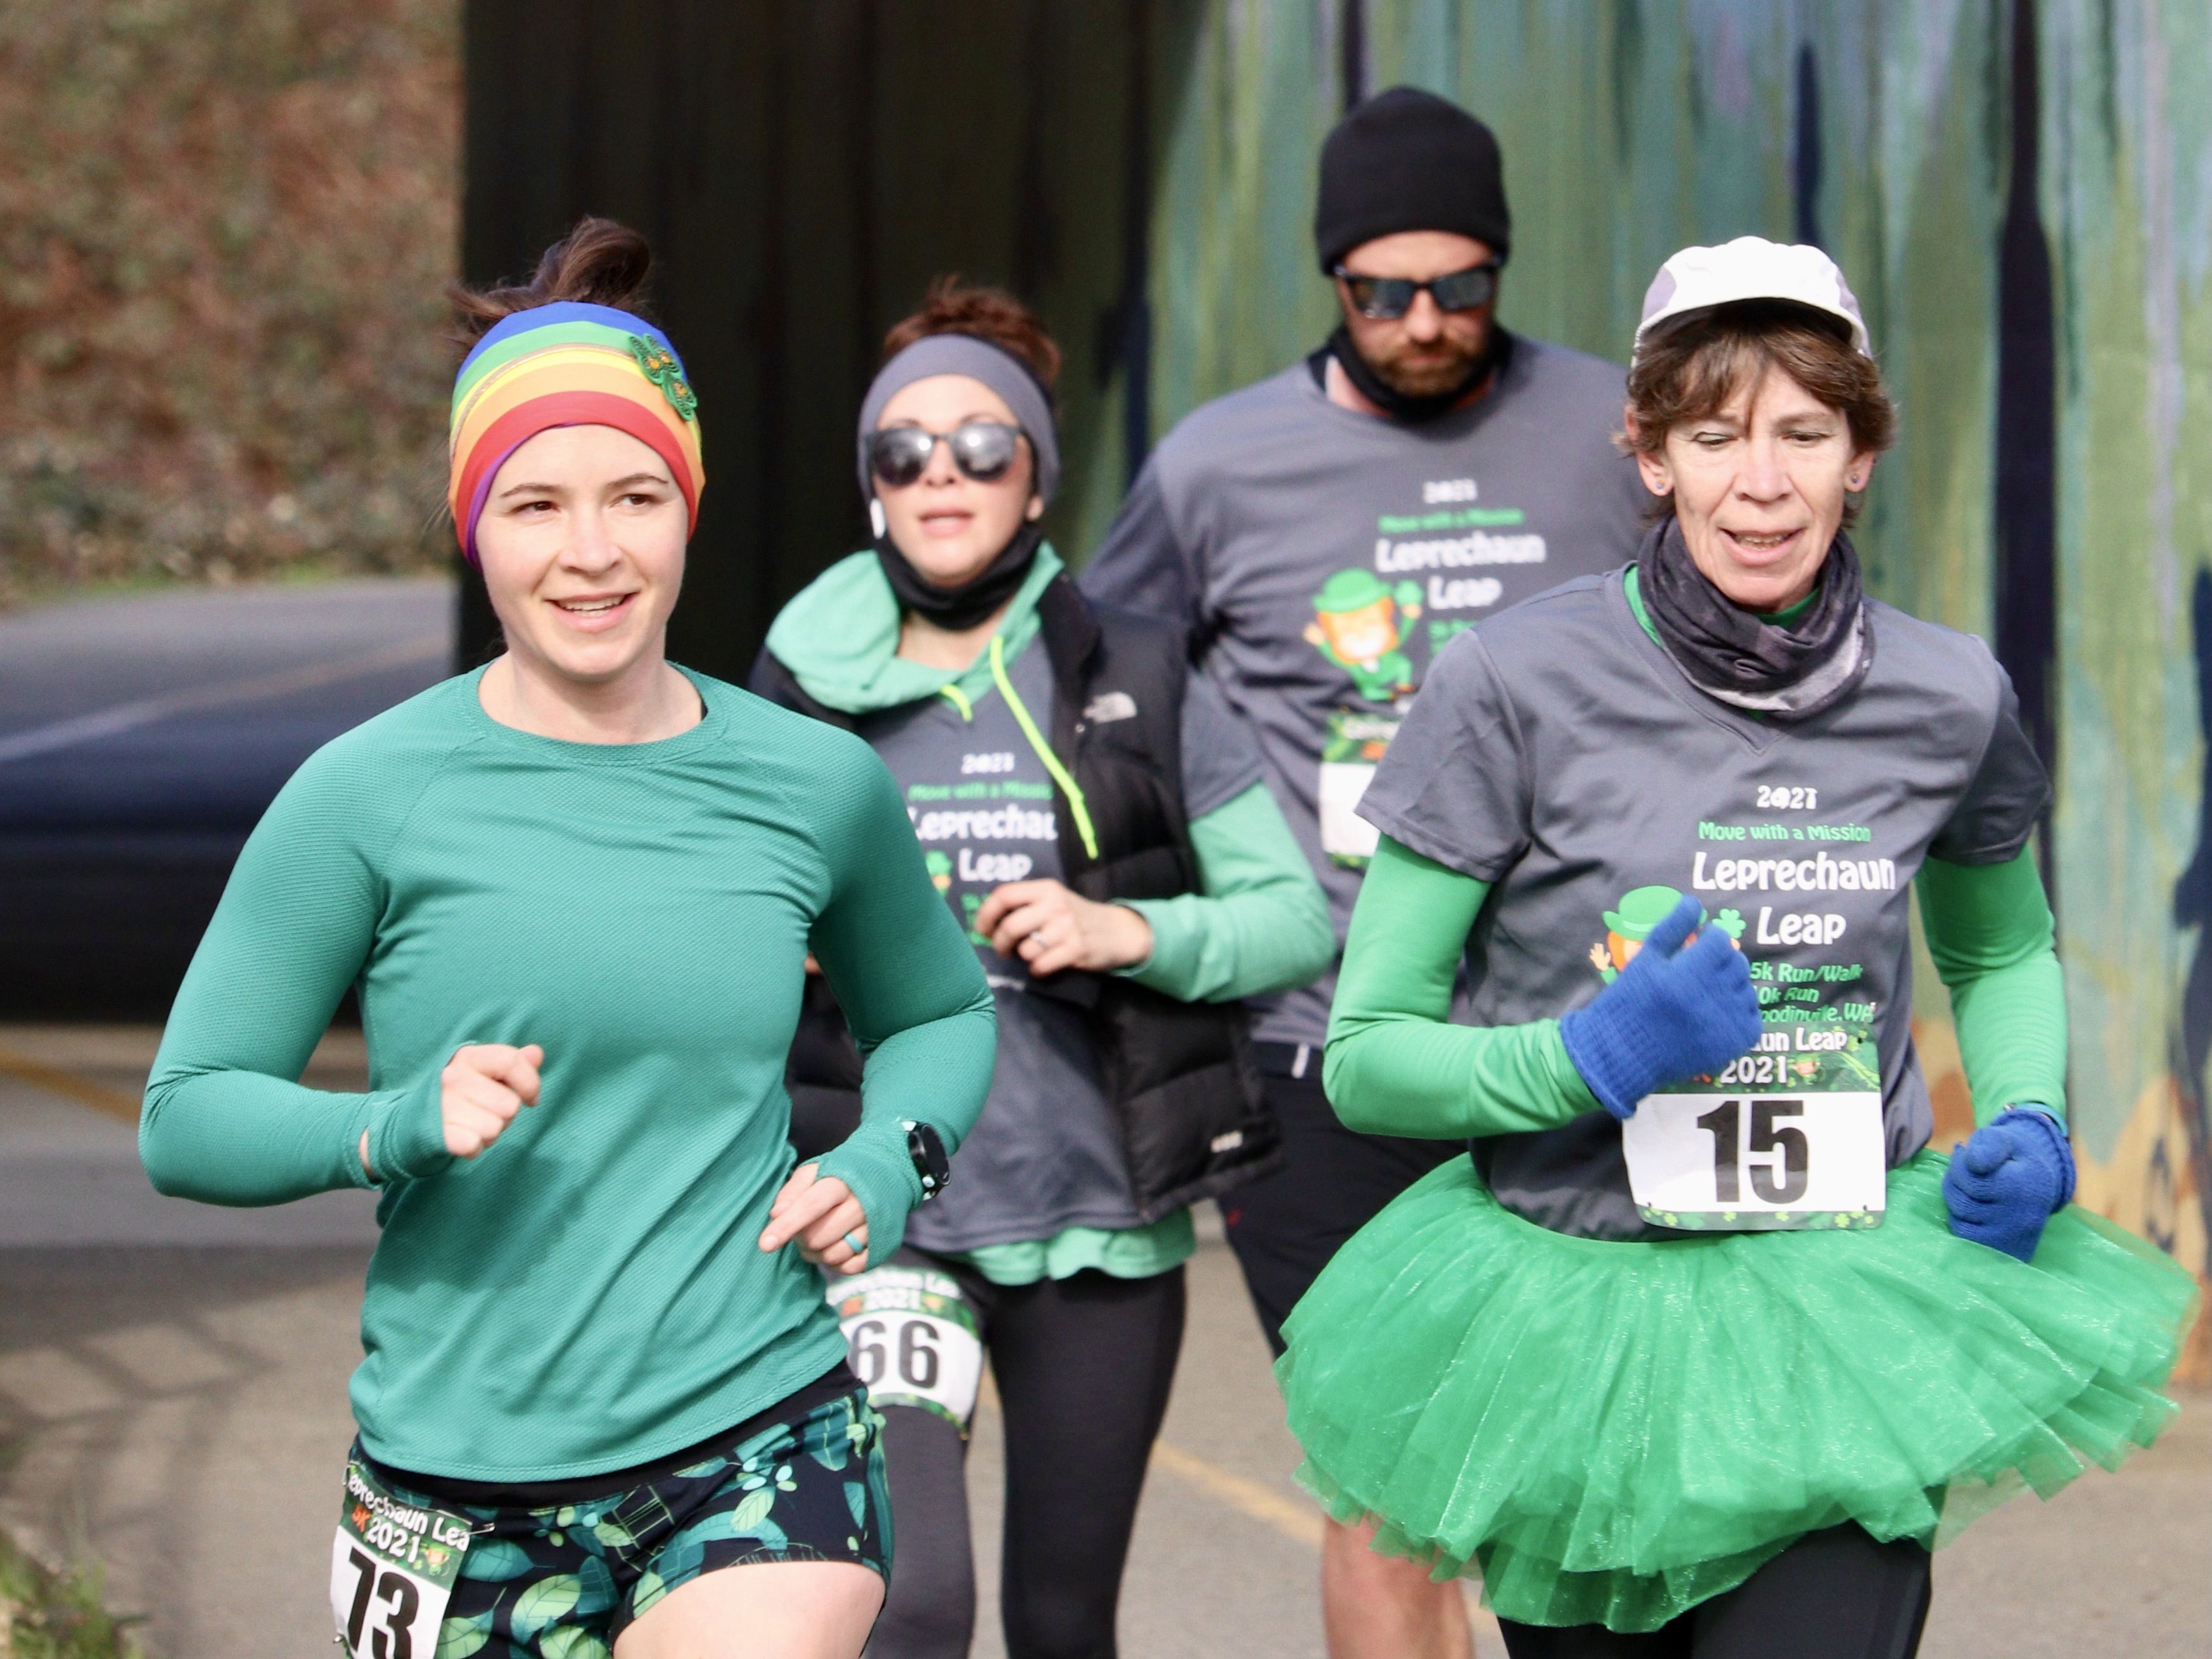 Move with a Mission!  Leprechaun Leap 5K/10K - Sign up here.